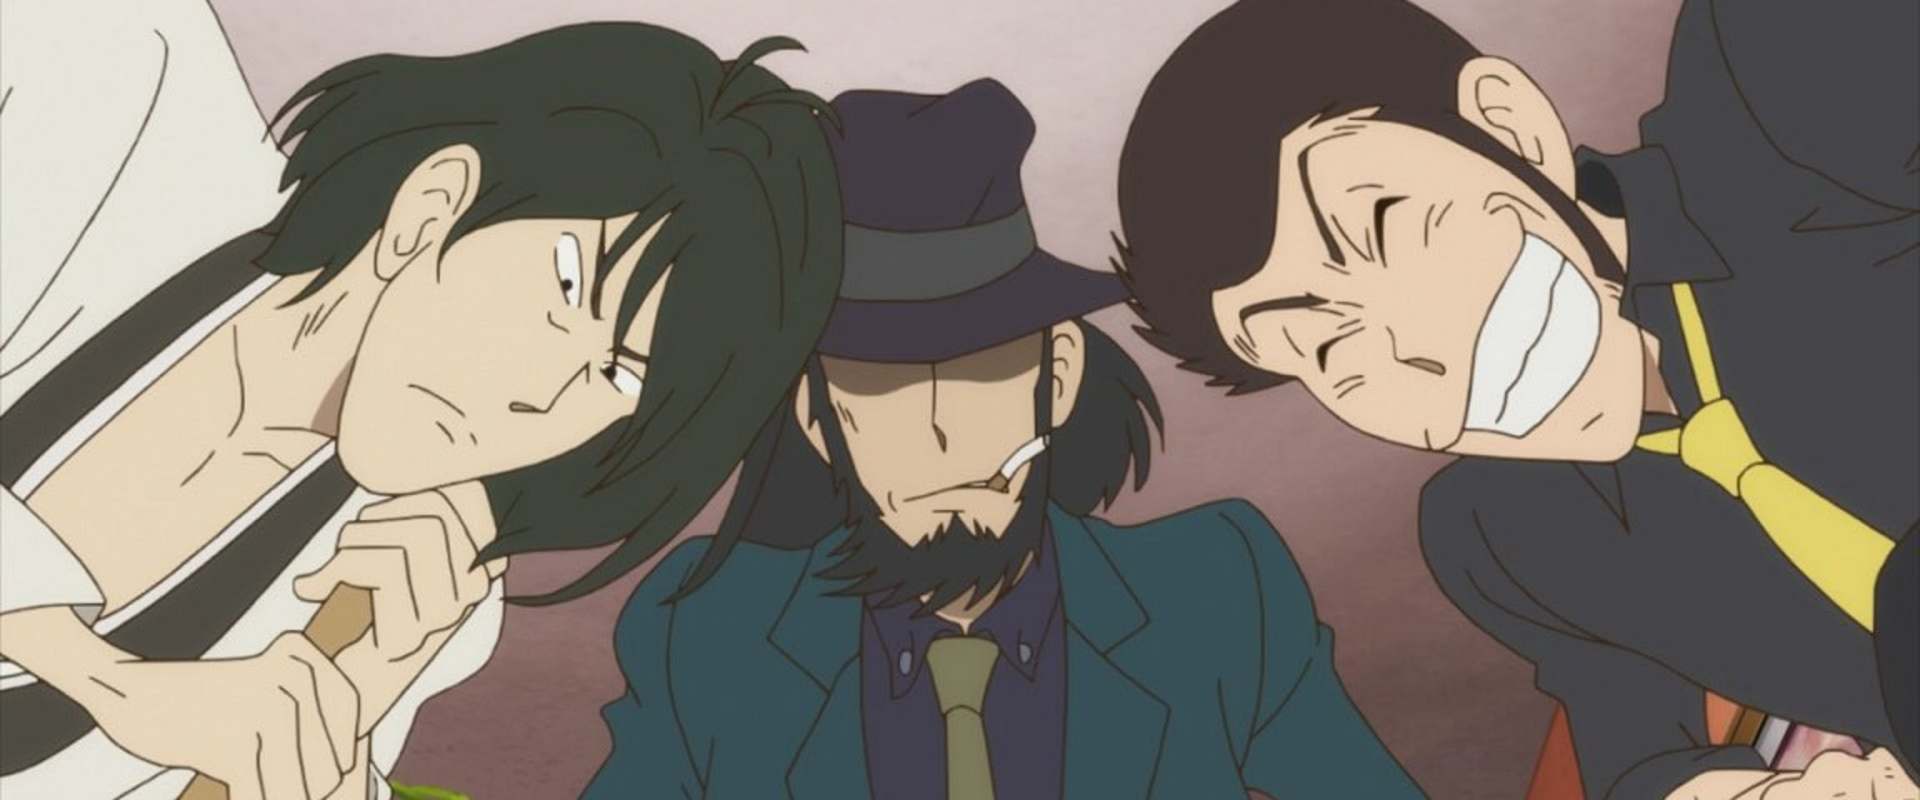 Lupin the Third: Prison of the Past background 1